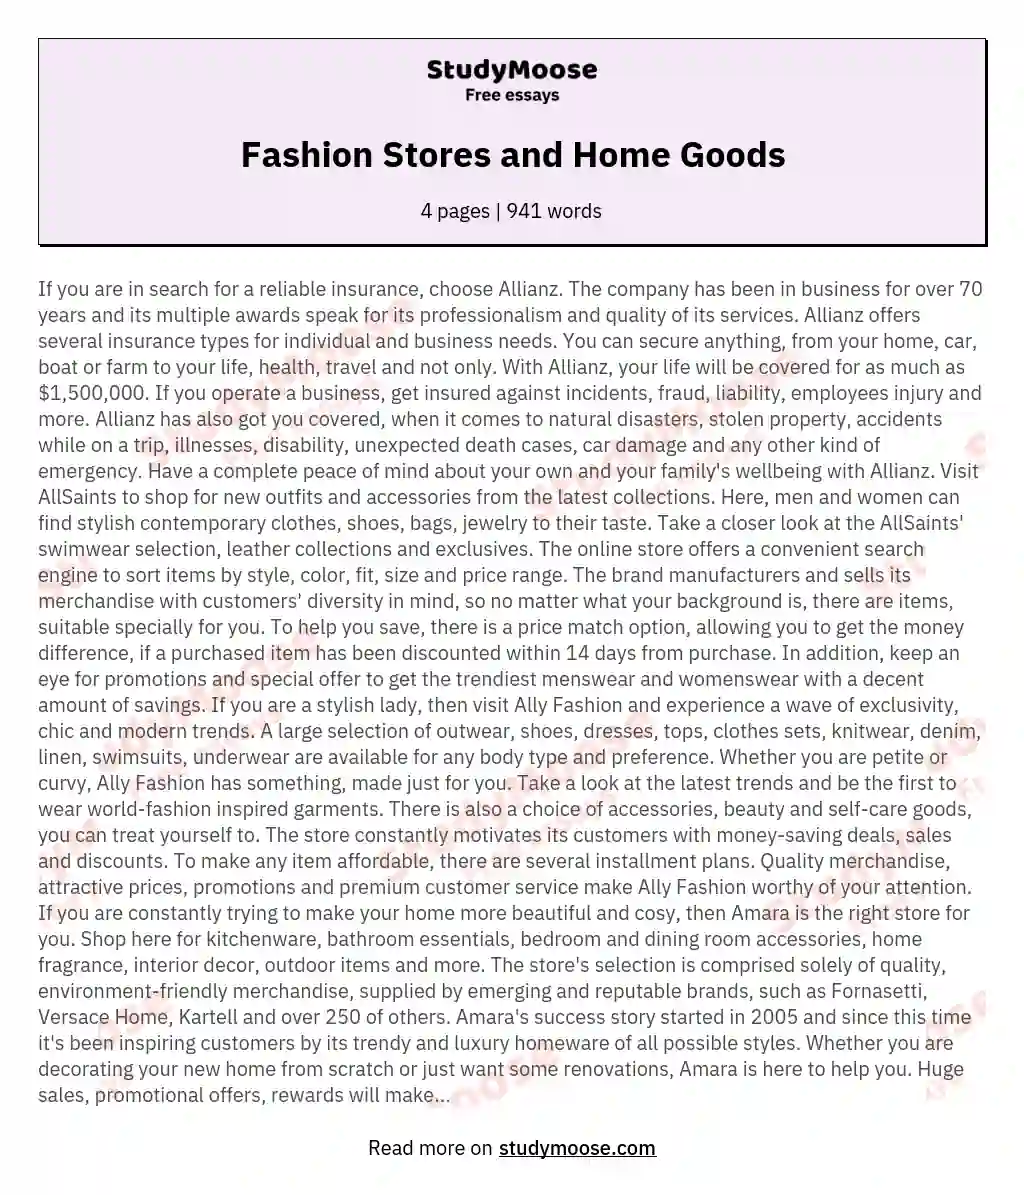 Fashion Stores and Home Goods essay